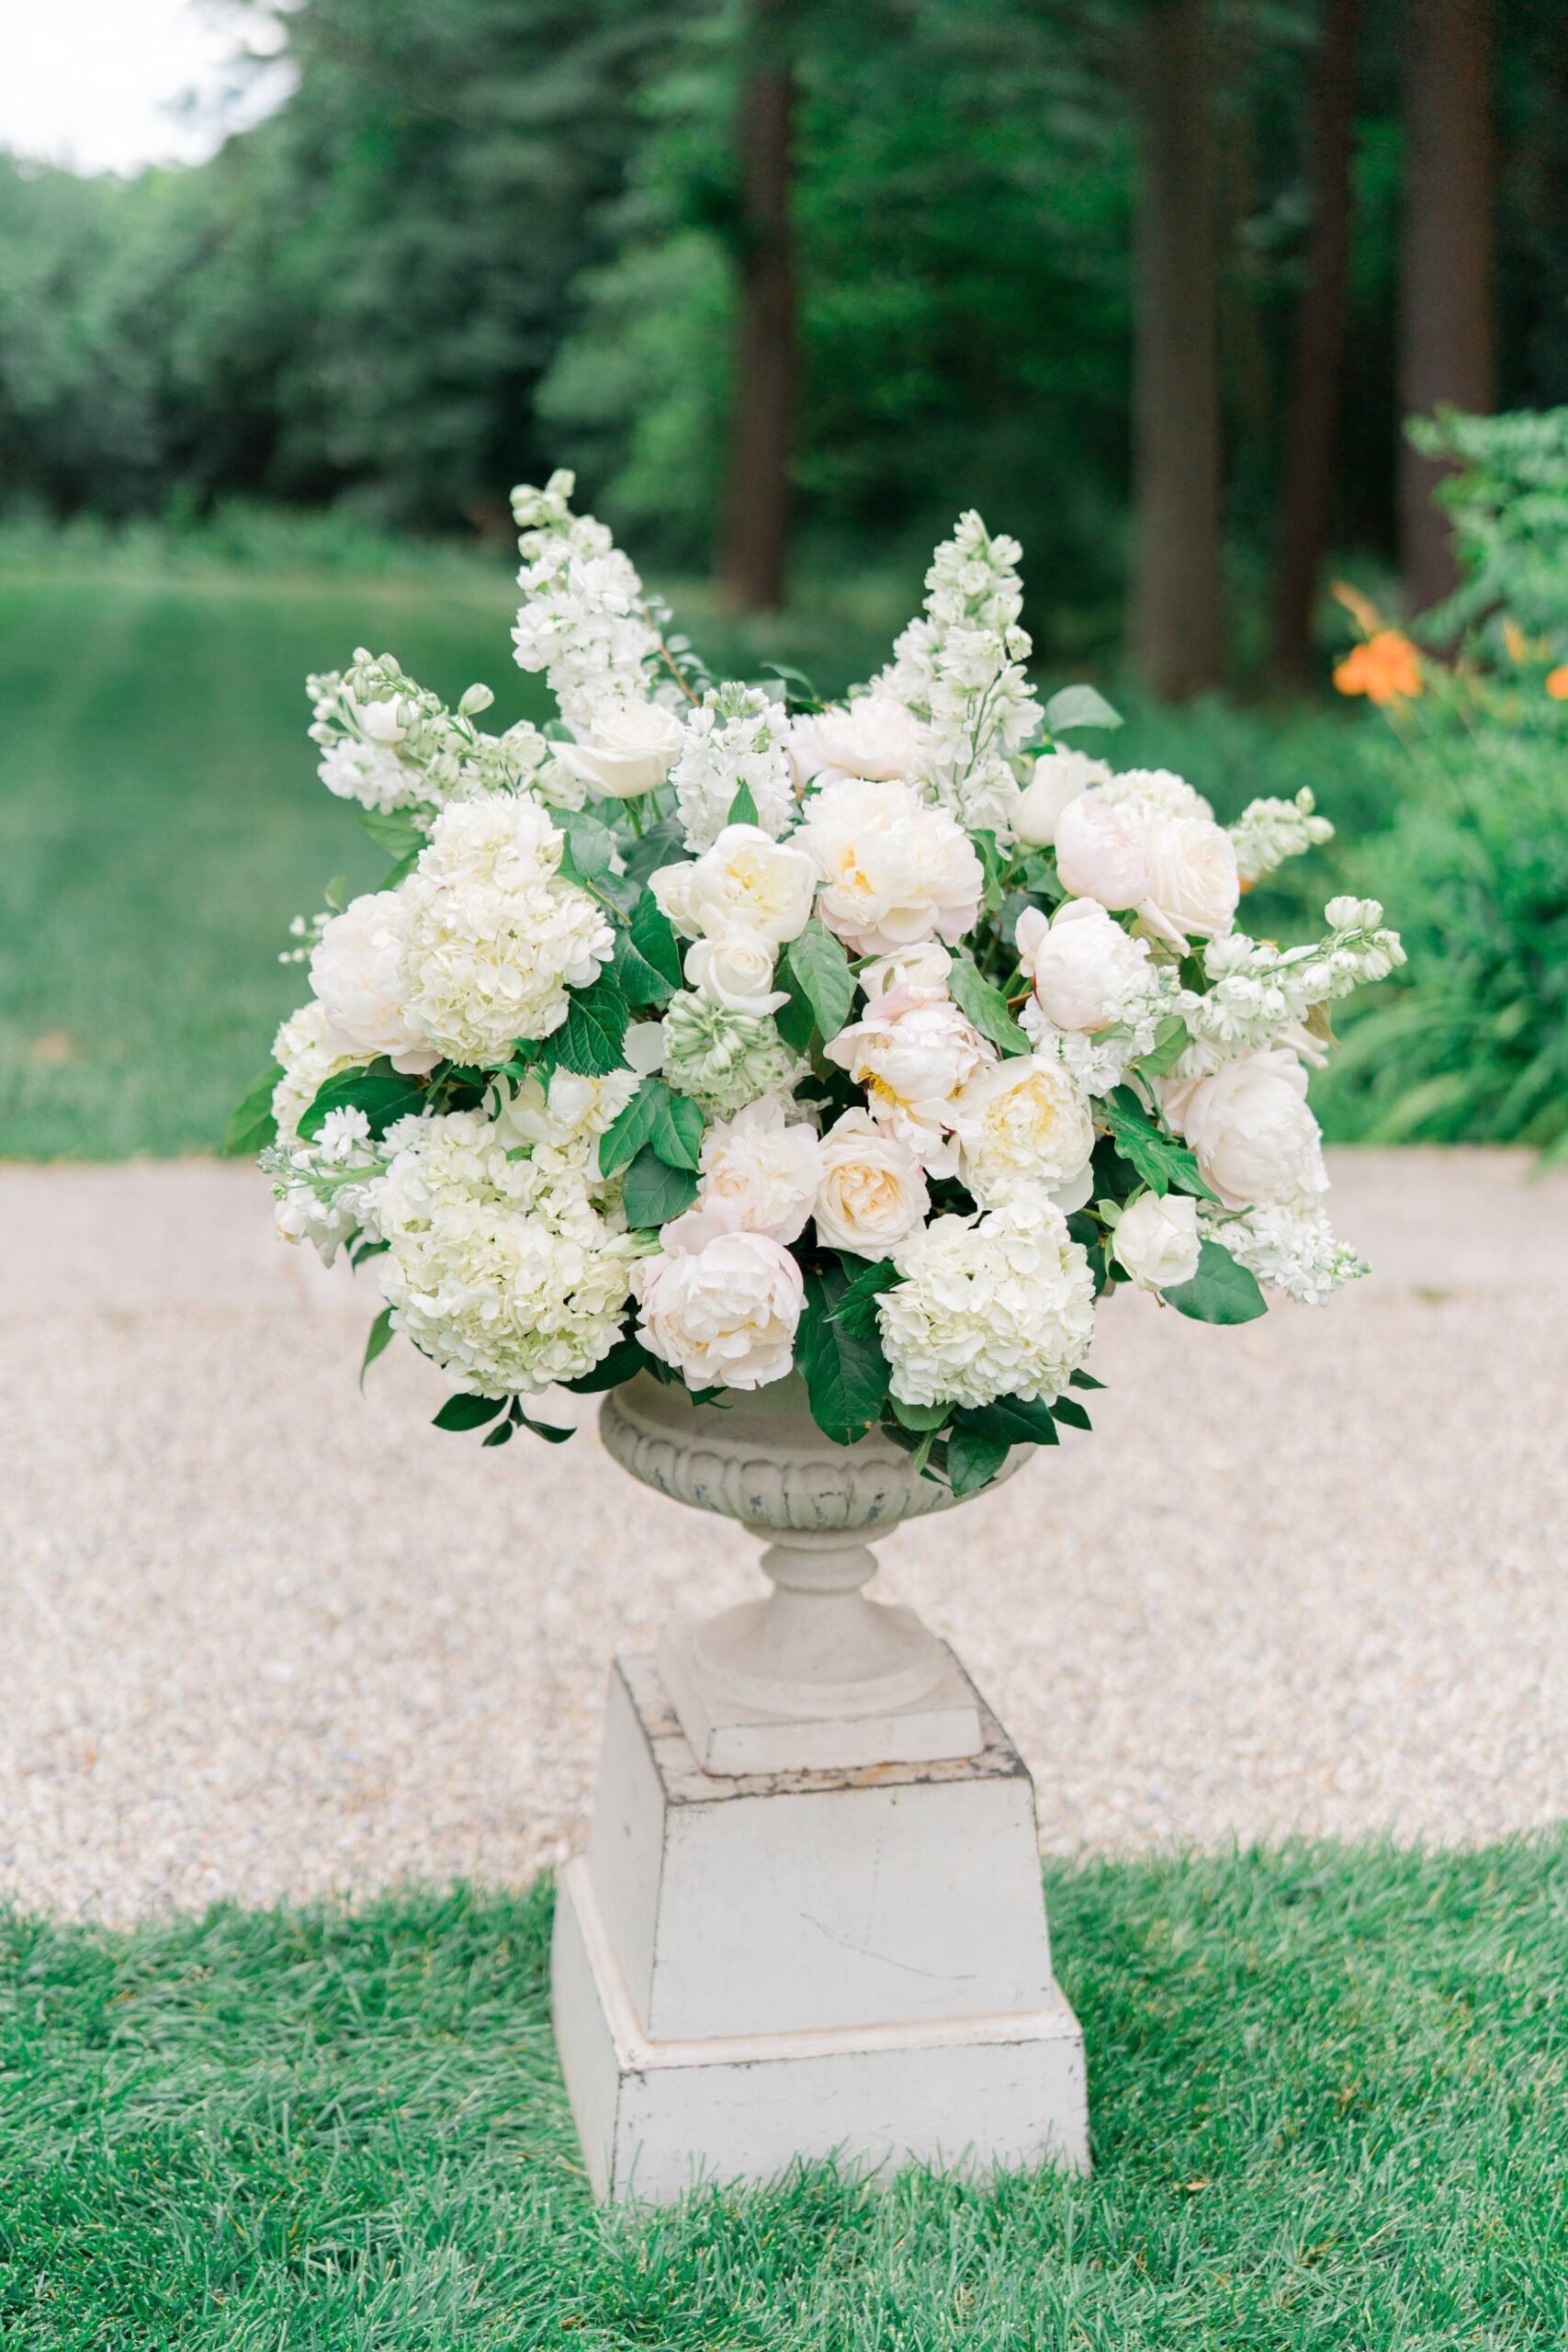 Lush white and green florals in stone pedestal. At boston wedding ceremony